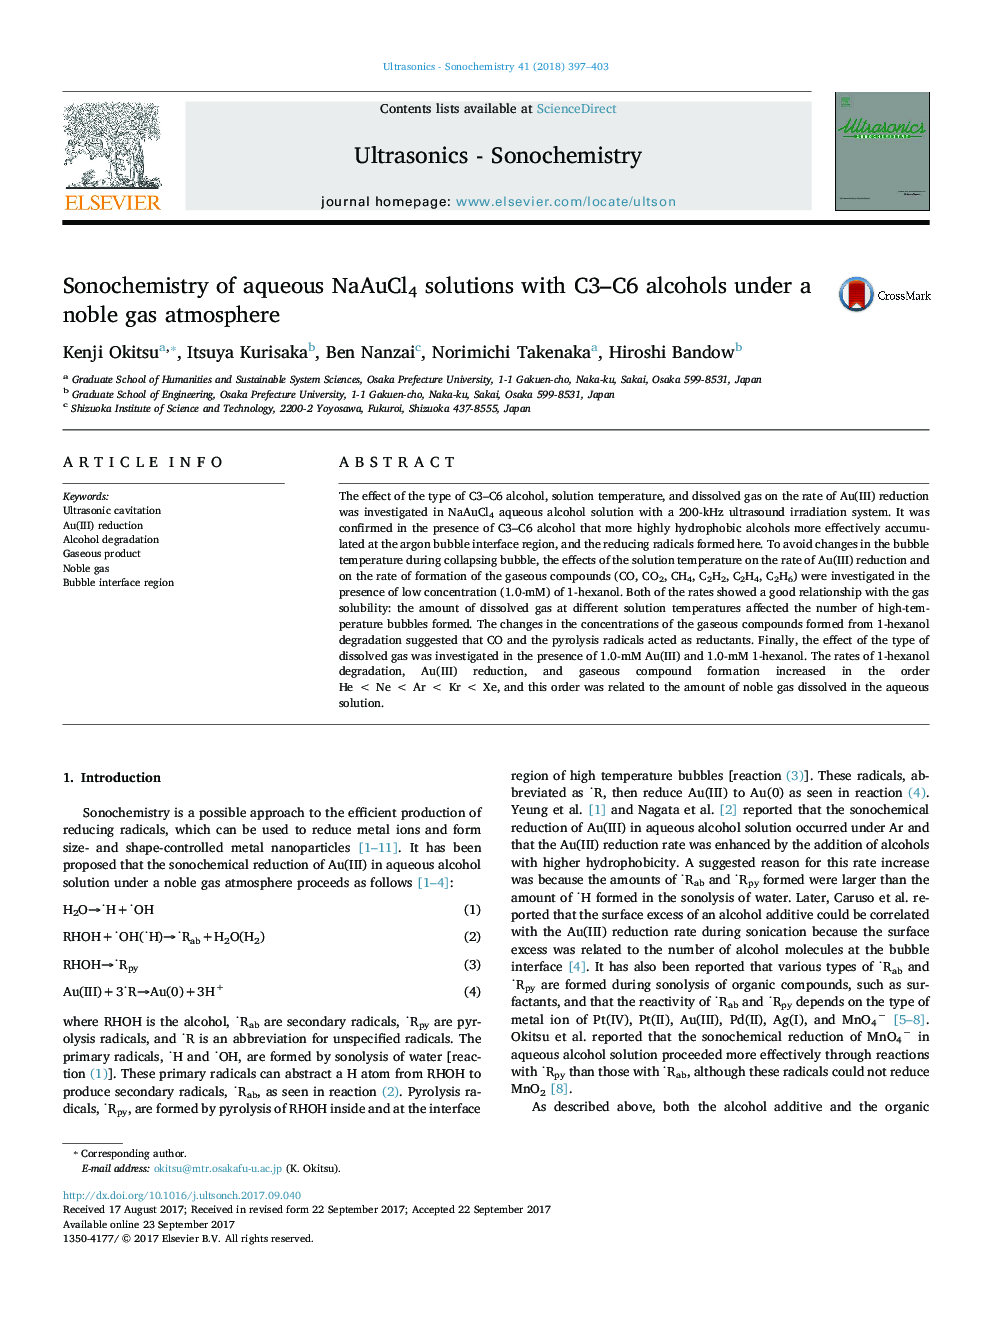 Sonochemistry of aqueous NaAuCl4 solutions with C3-C6 alcohols under a noble gas atmosphere